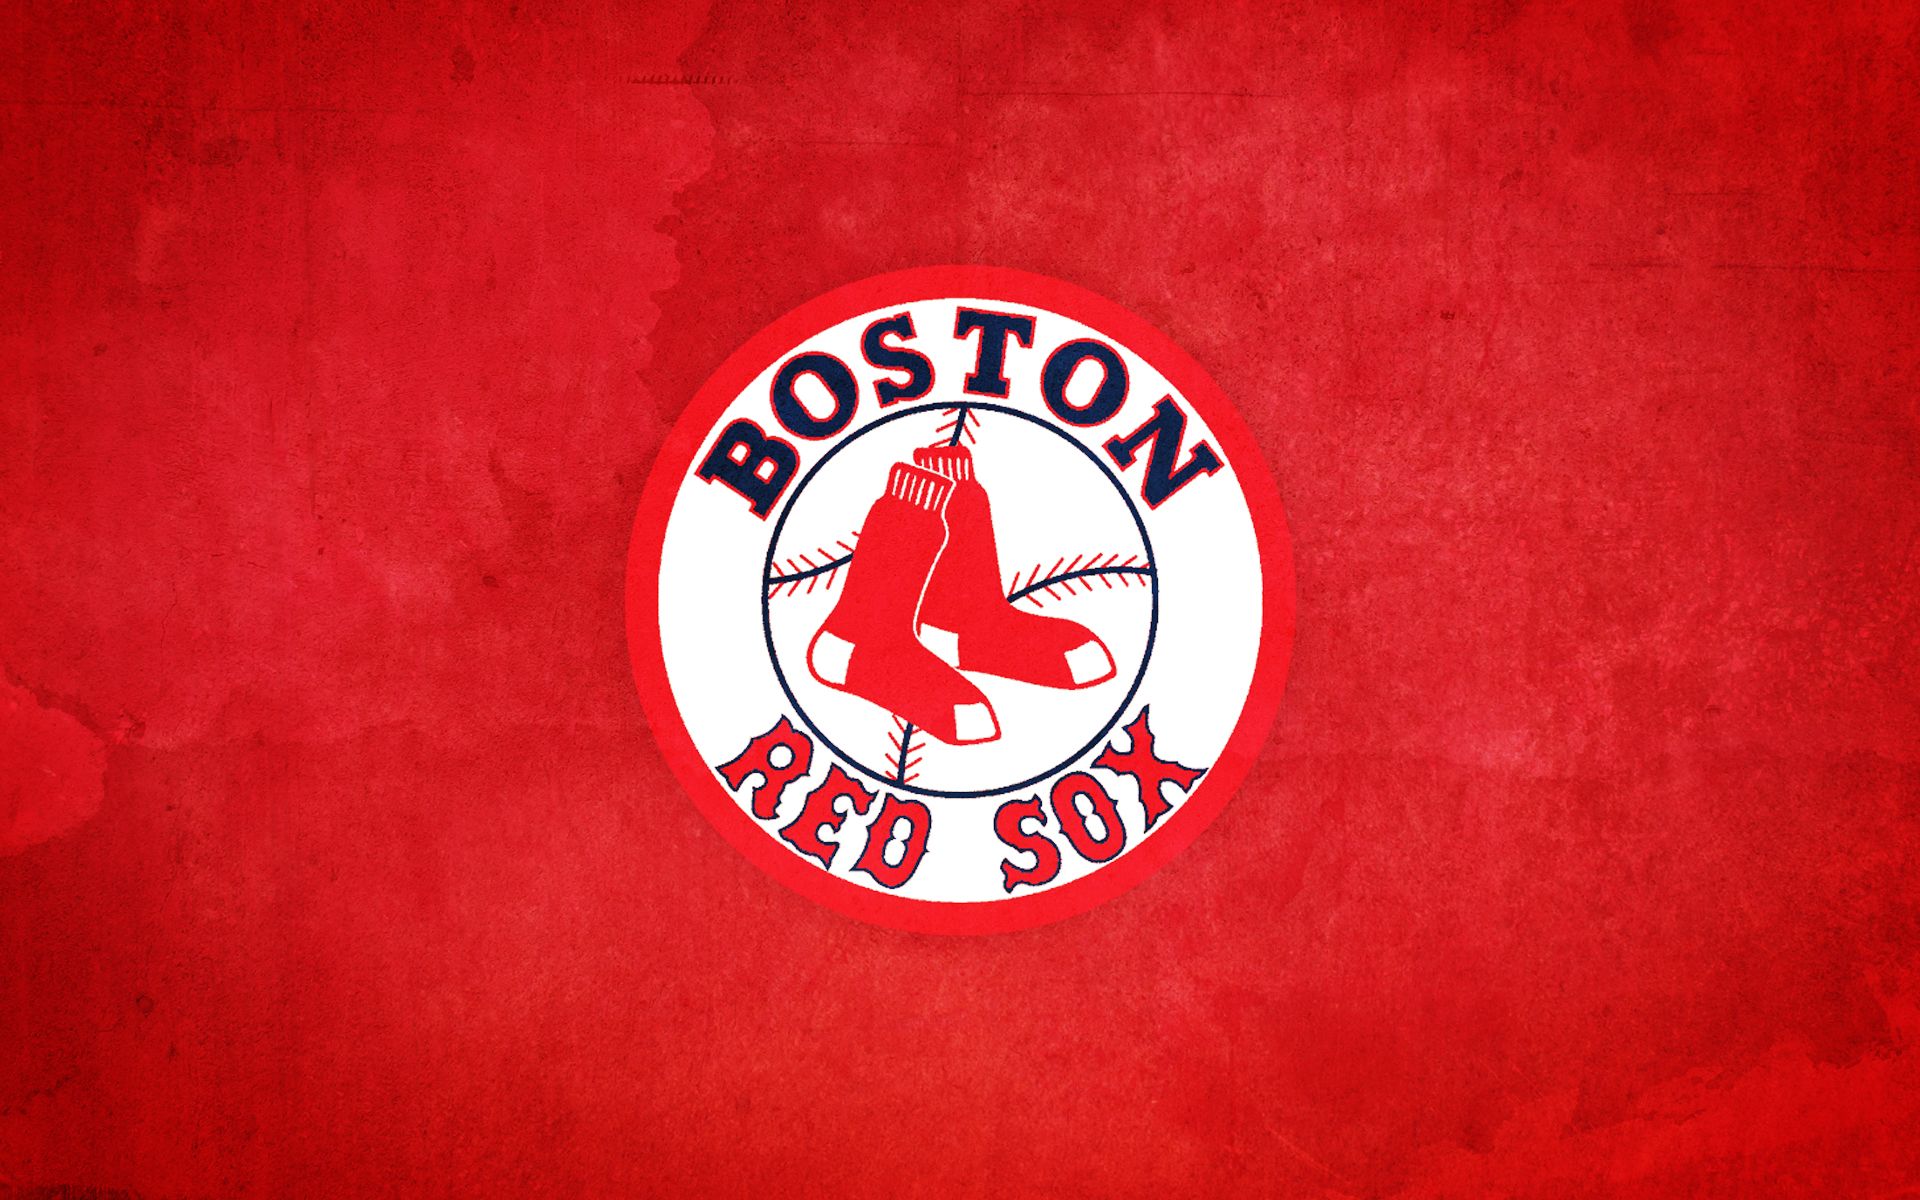 Boston Red Sox - Hollywood dreamin' Wallpaper Wednesday x